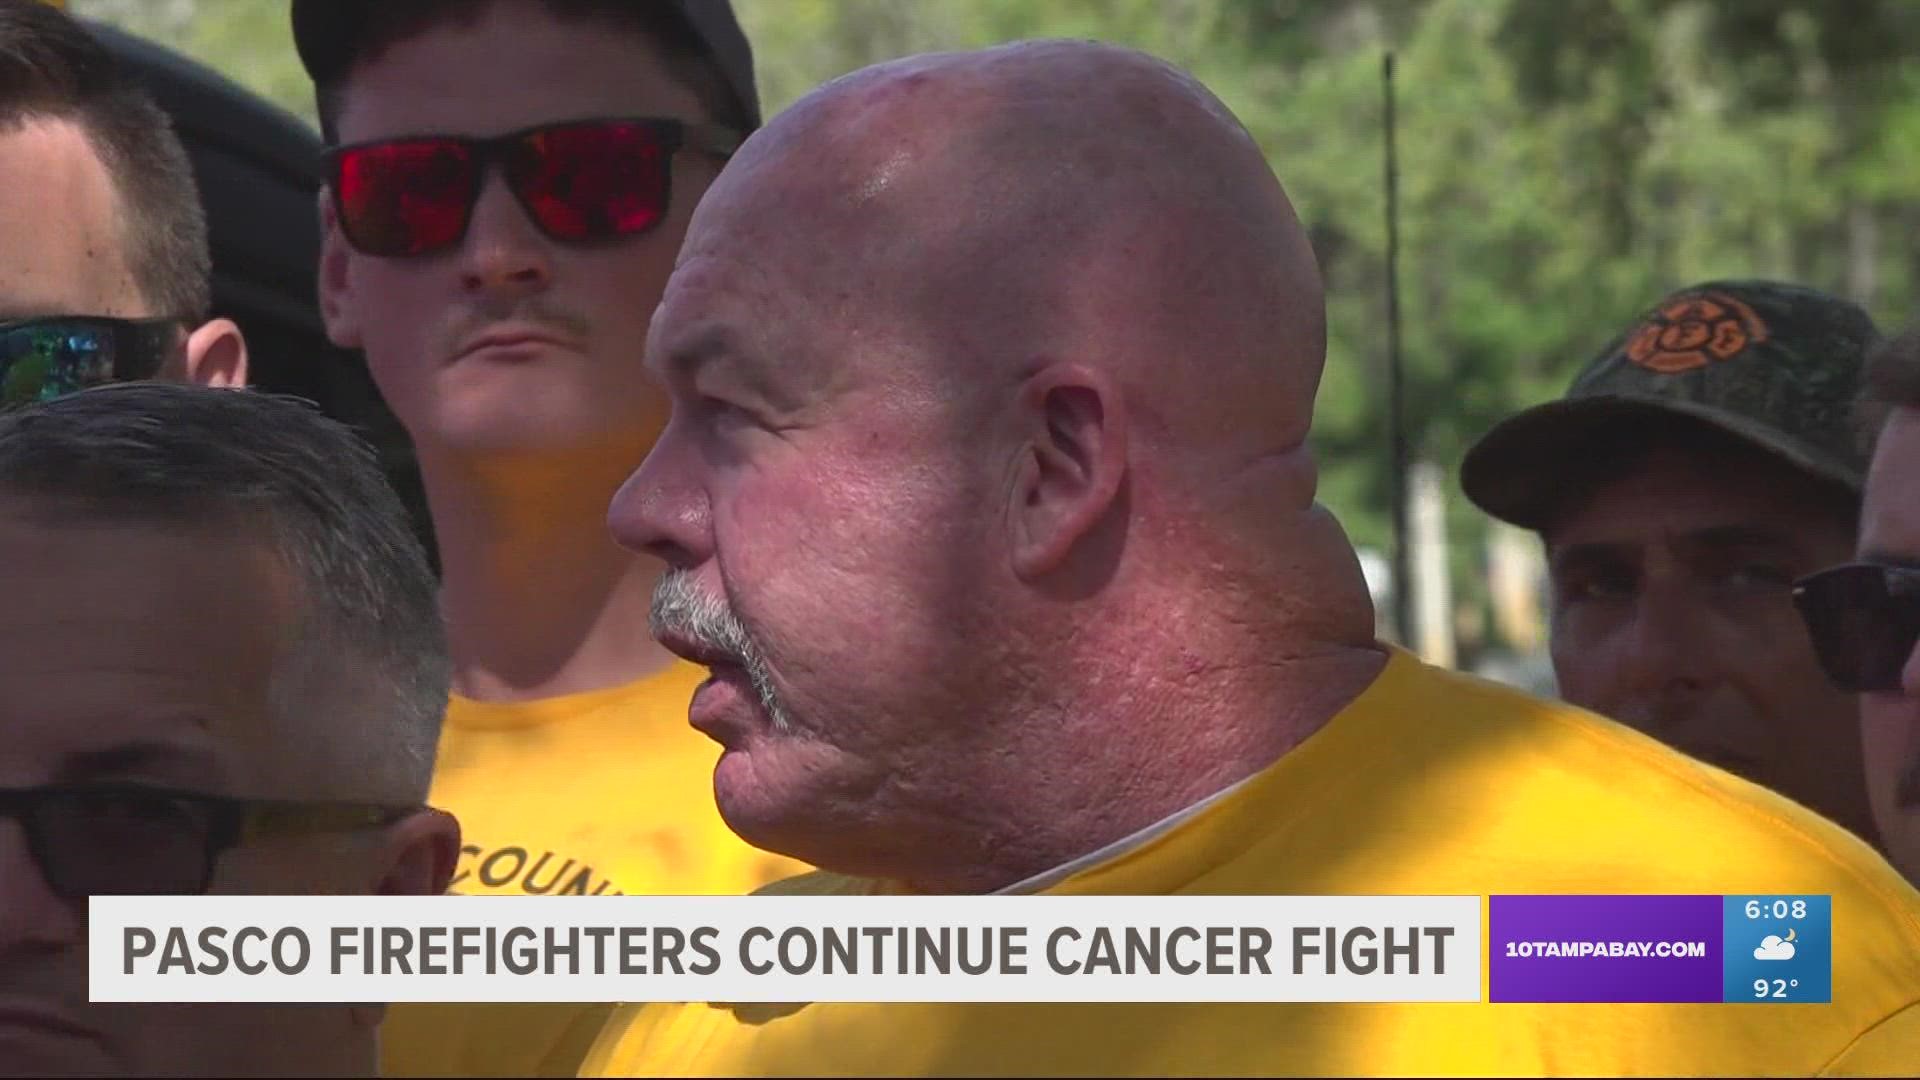 They say the county isn't honoring legislation that entitles a $25,000 cash payout for firefighters diagnosed with cancer.